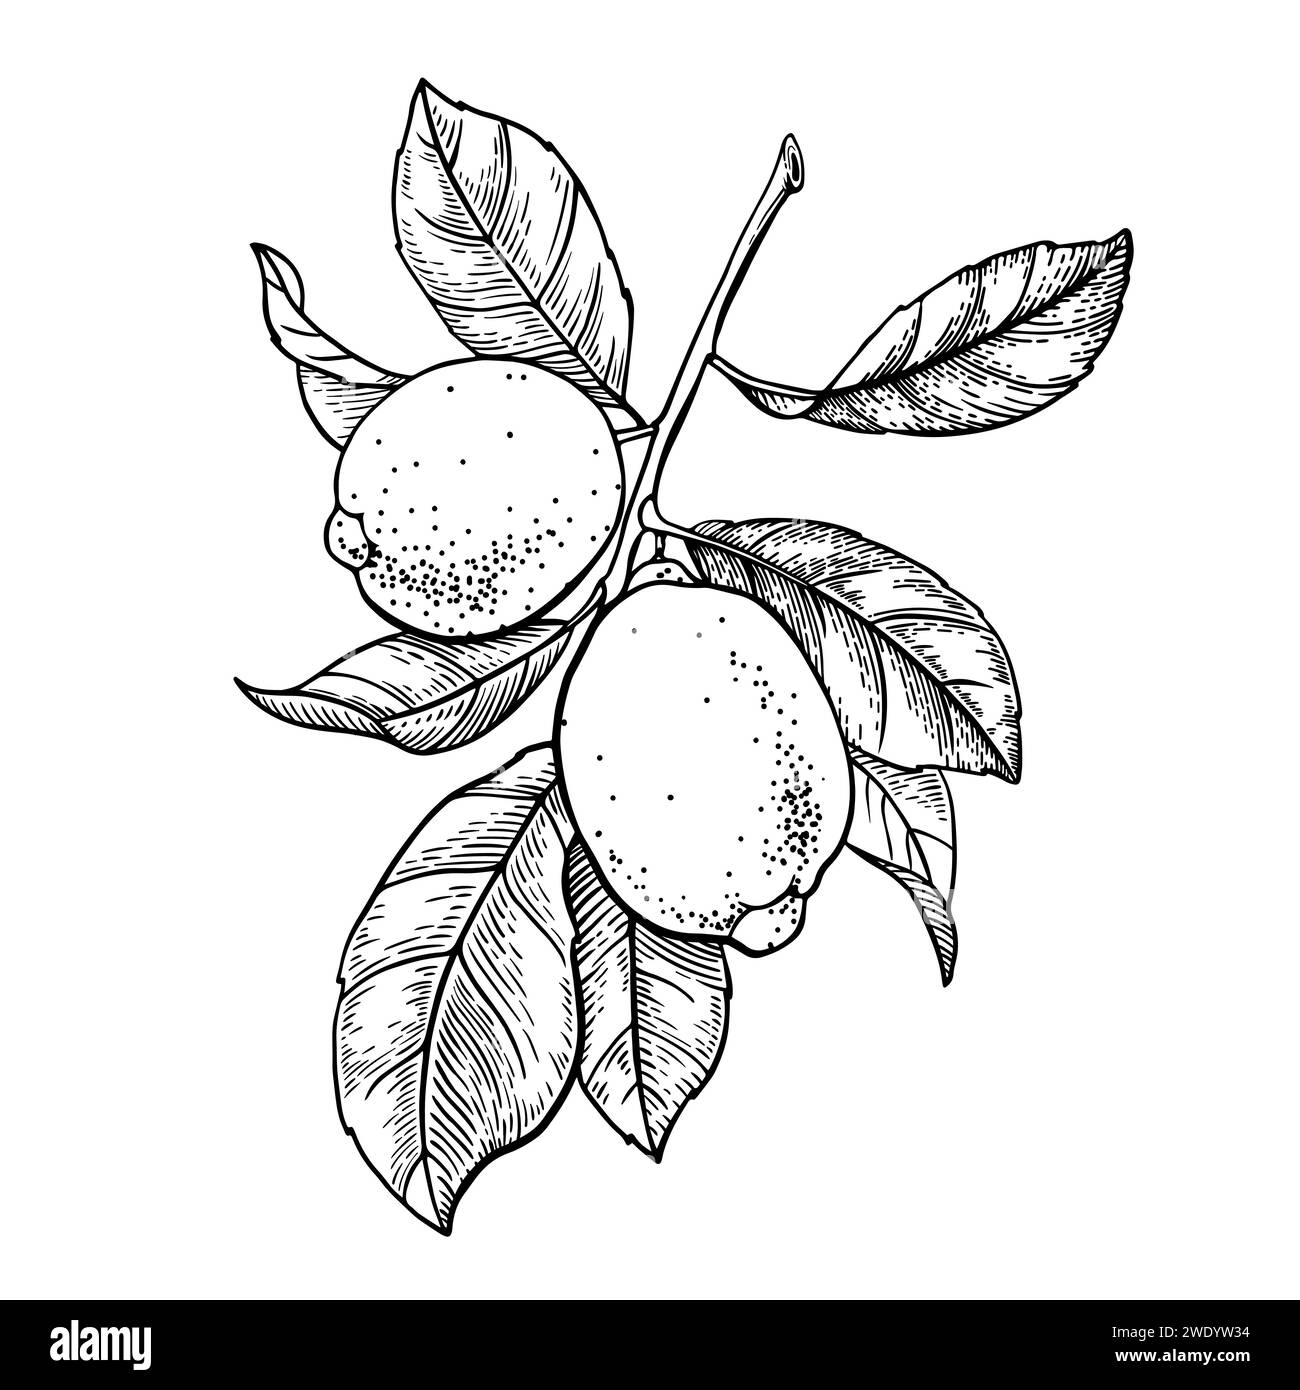 Lemon branch with leaves and fruits. Black and white contour drawing ...